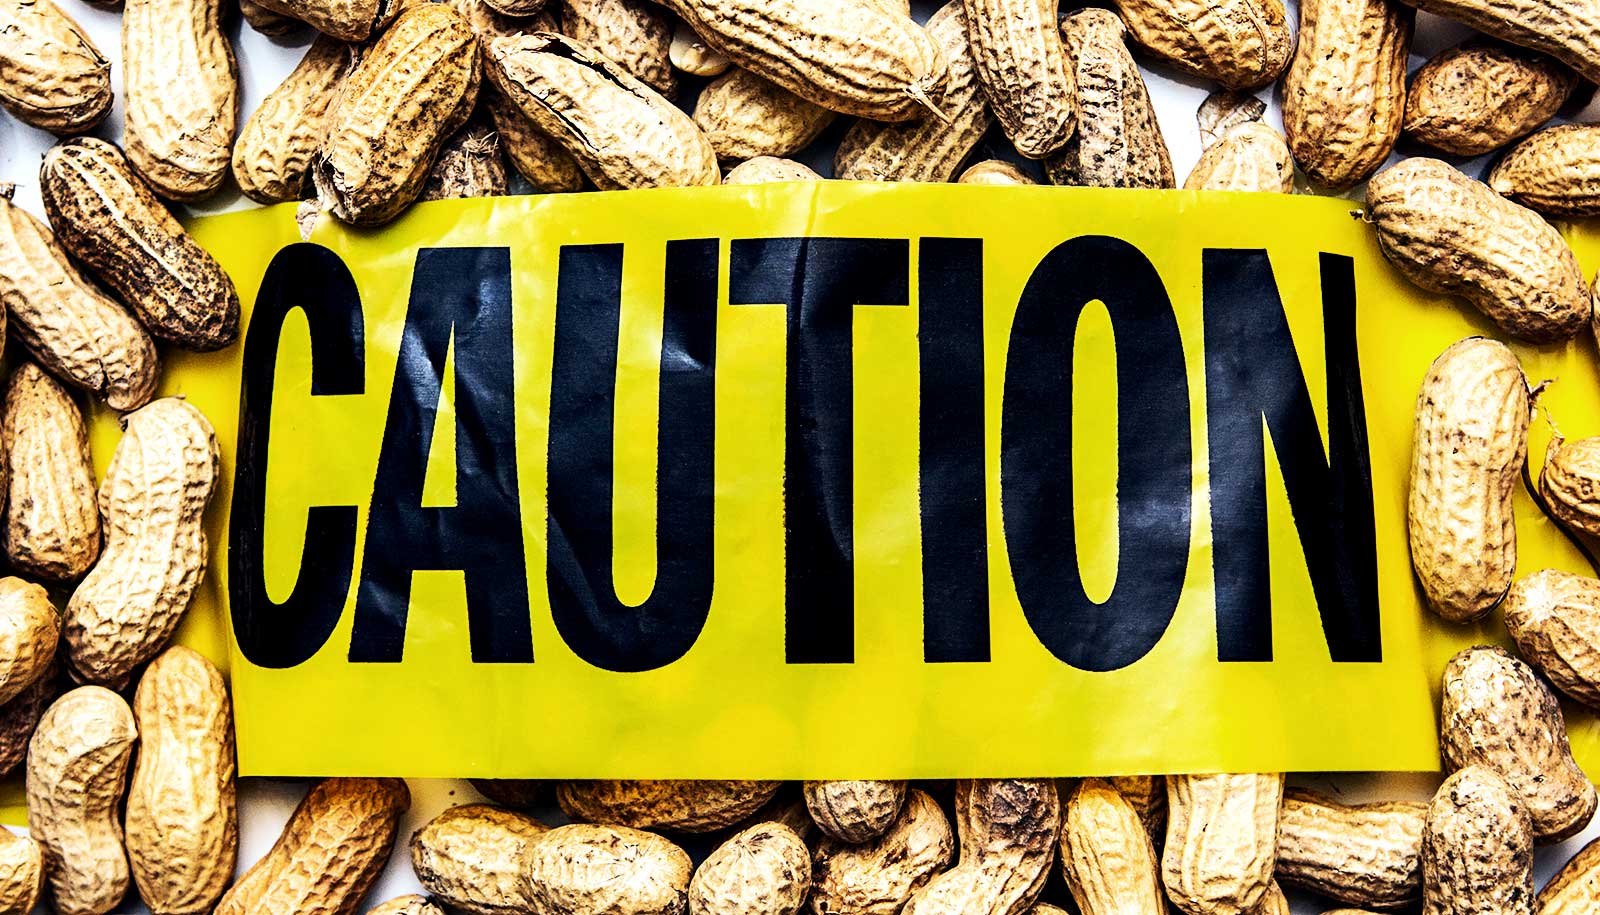 quality-control-system-problems-may-explain-food-allergies-futurity